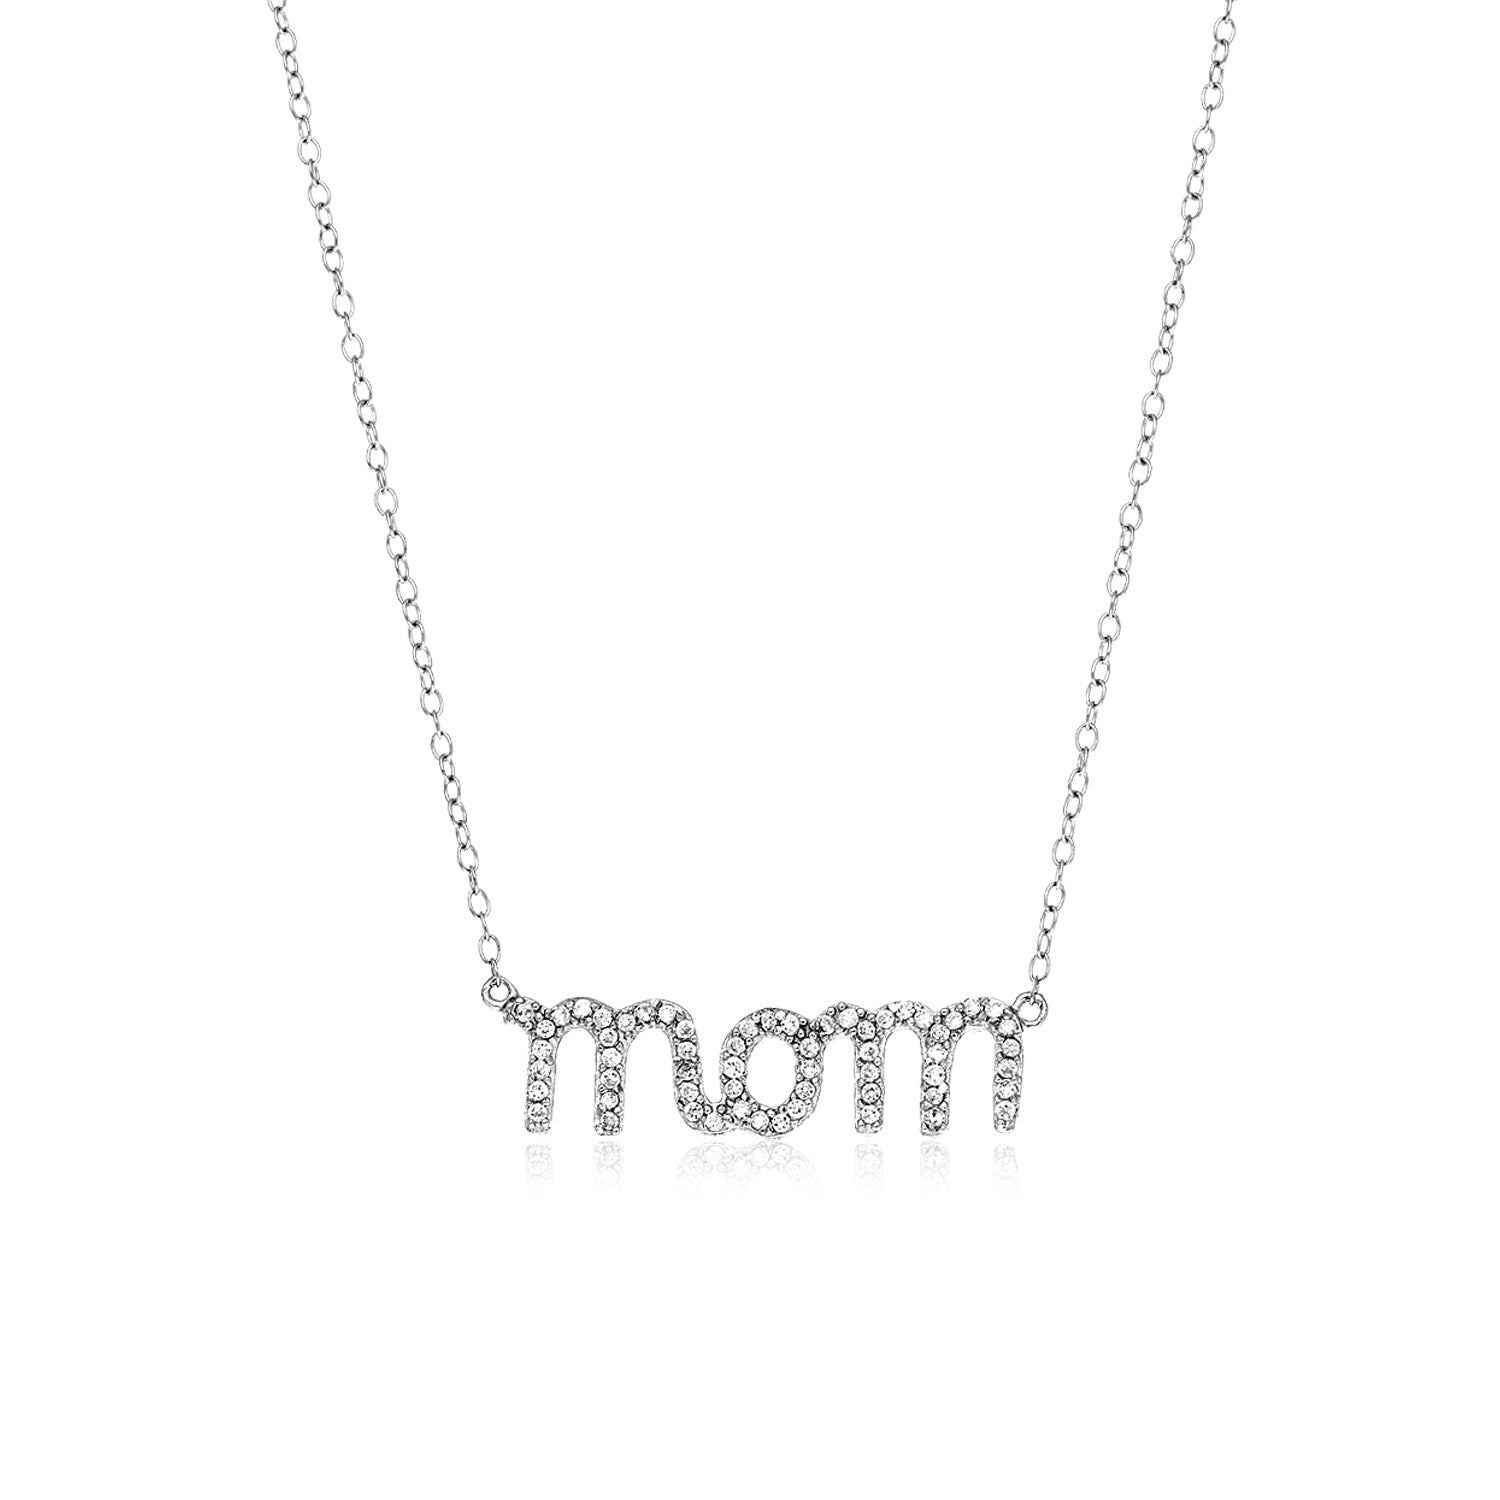 Sterling Silver Mom Necklace with Cubic Zirconias, size 18''